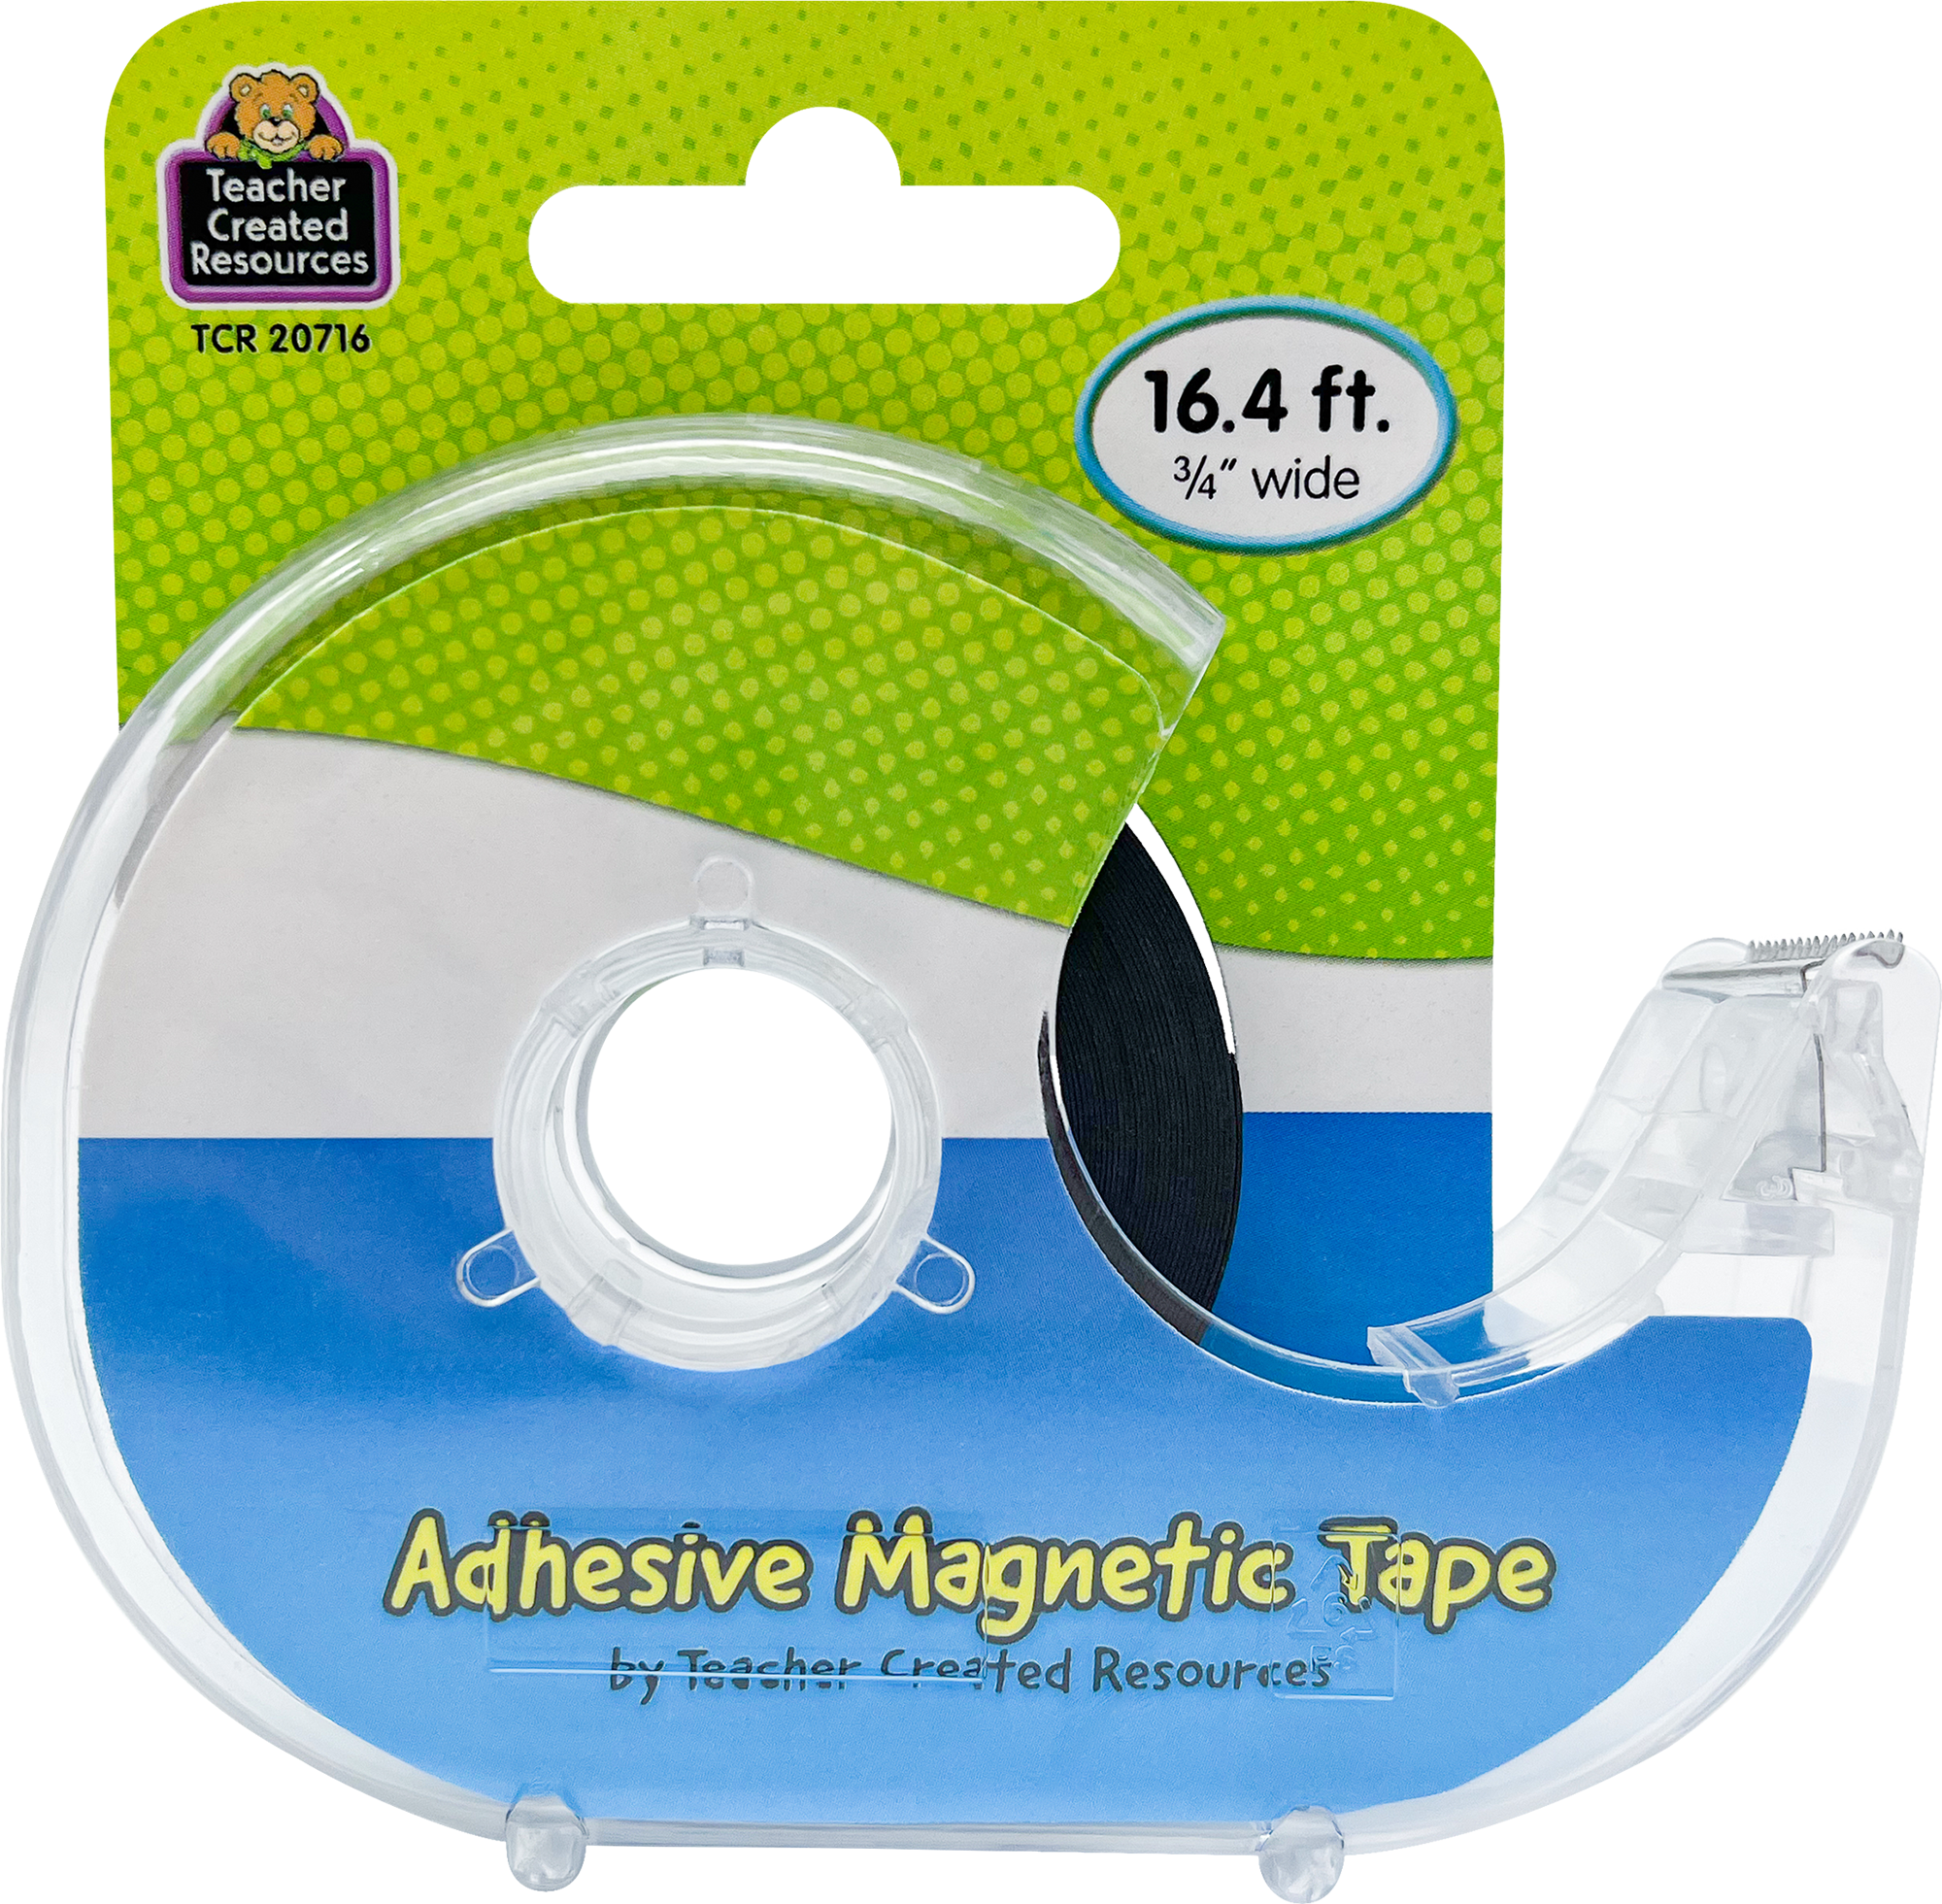 Adhesive Magnetic Tape - TCR20716